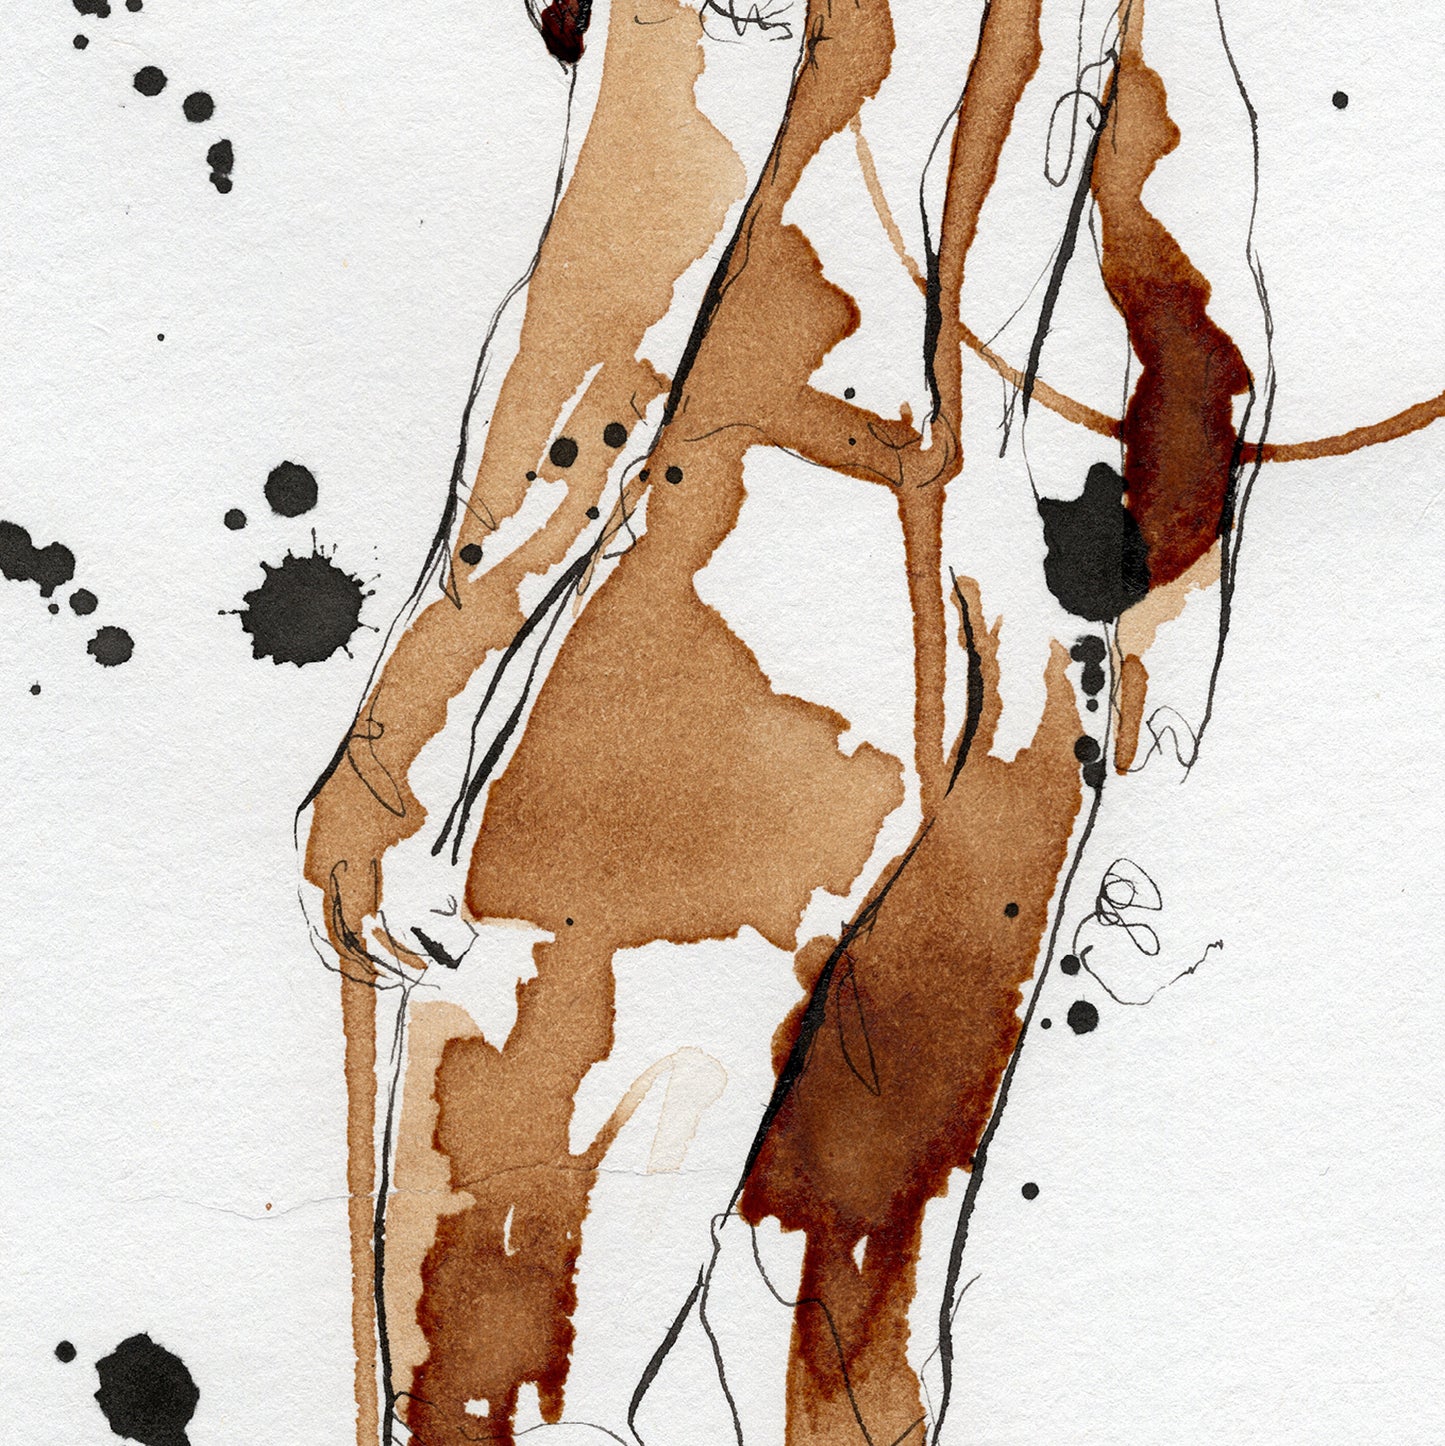 Man Standing Erotic Painting Made with Coffee by Brenden Sanbrn